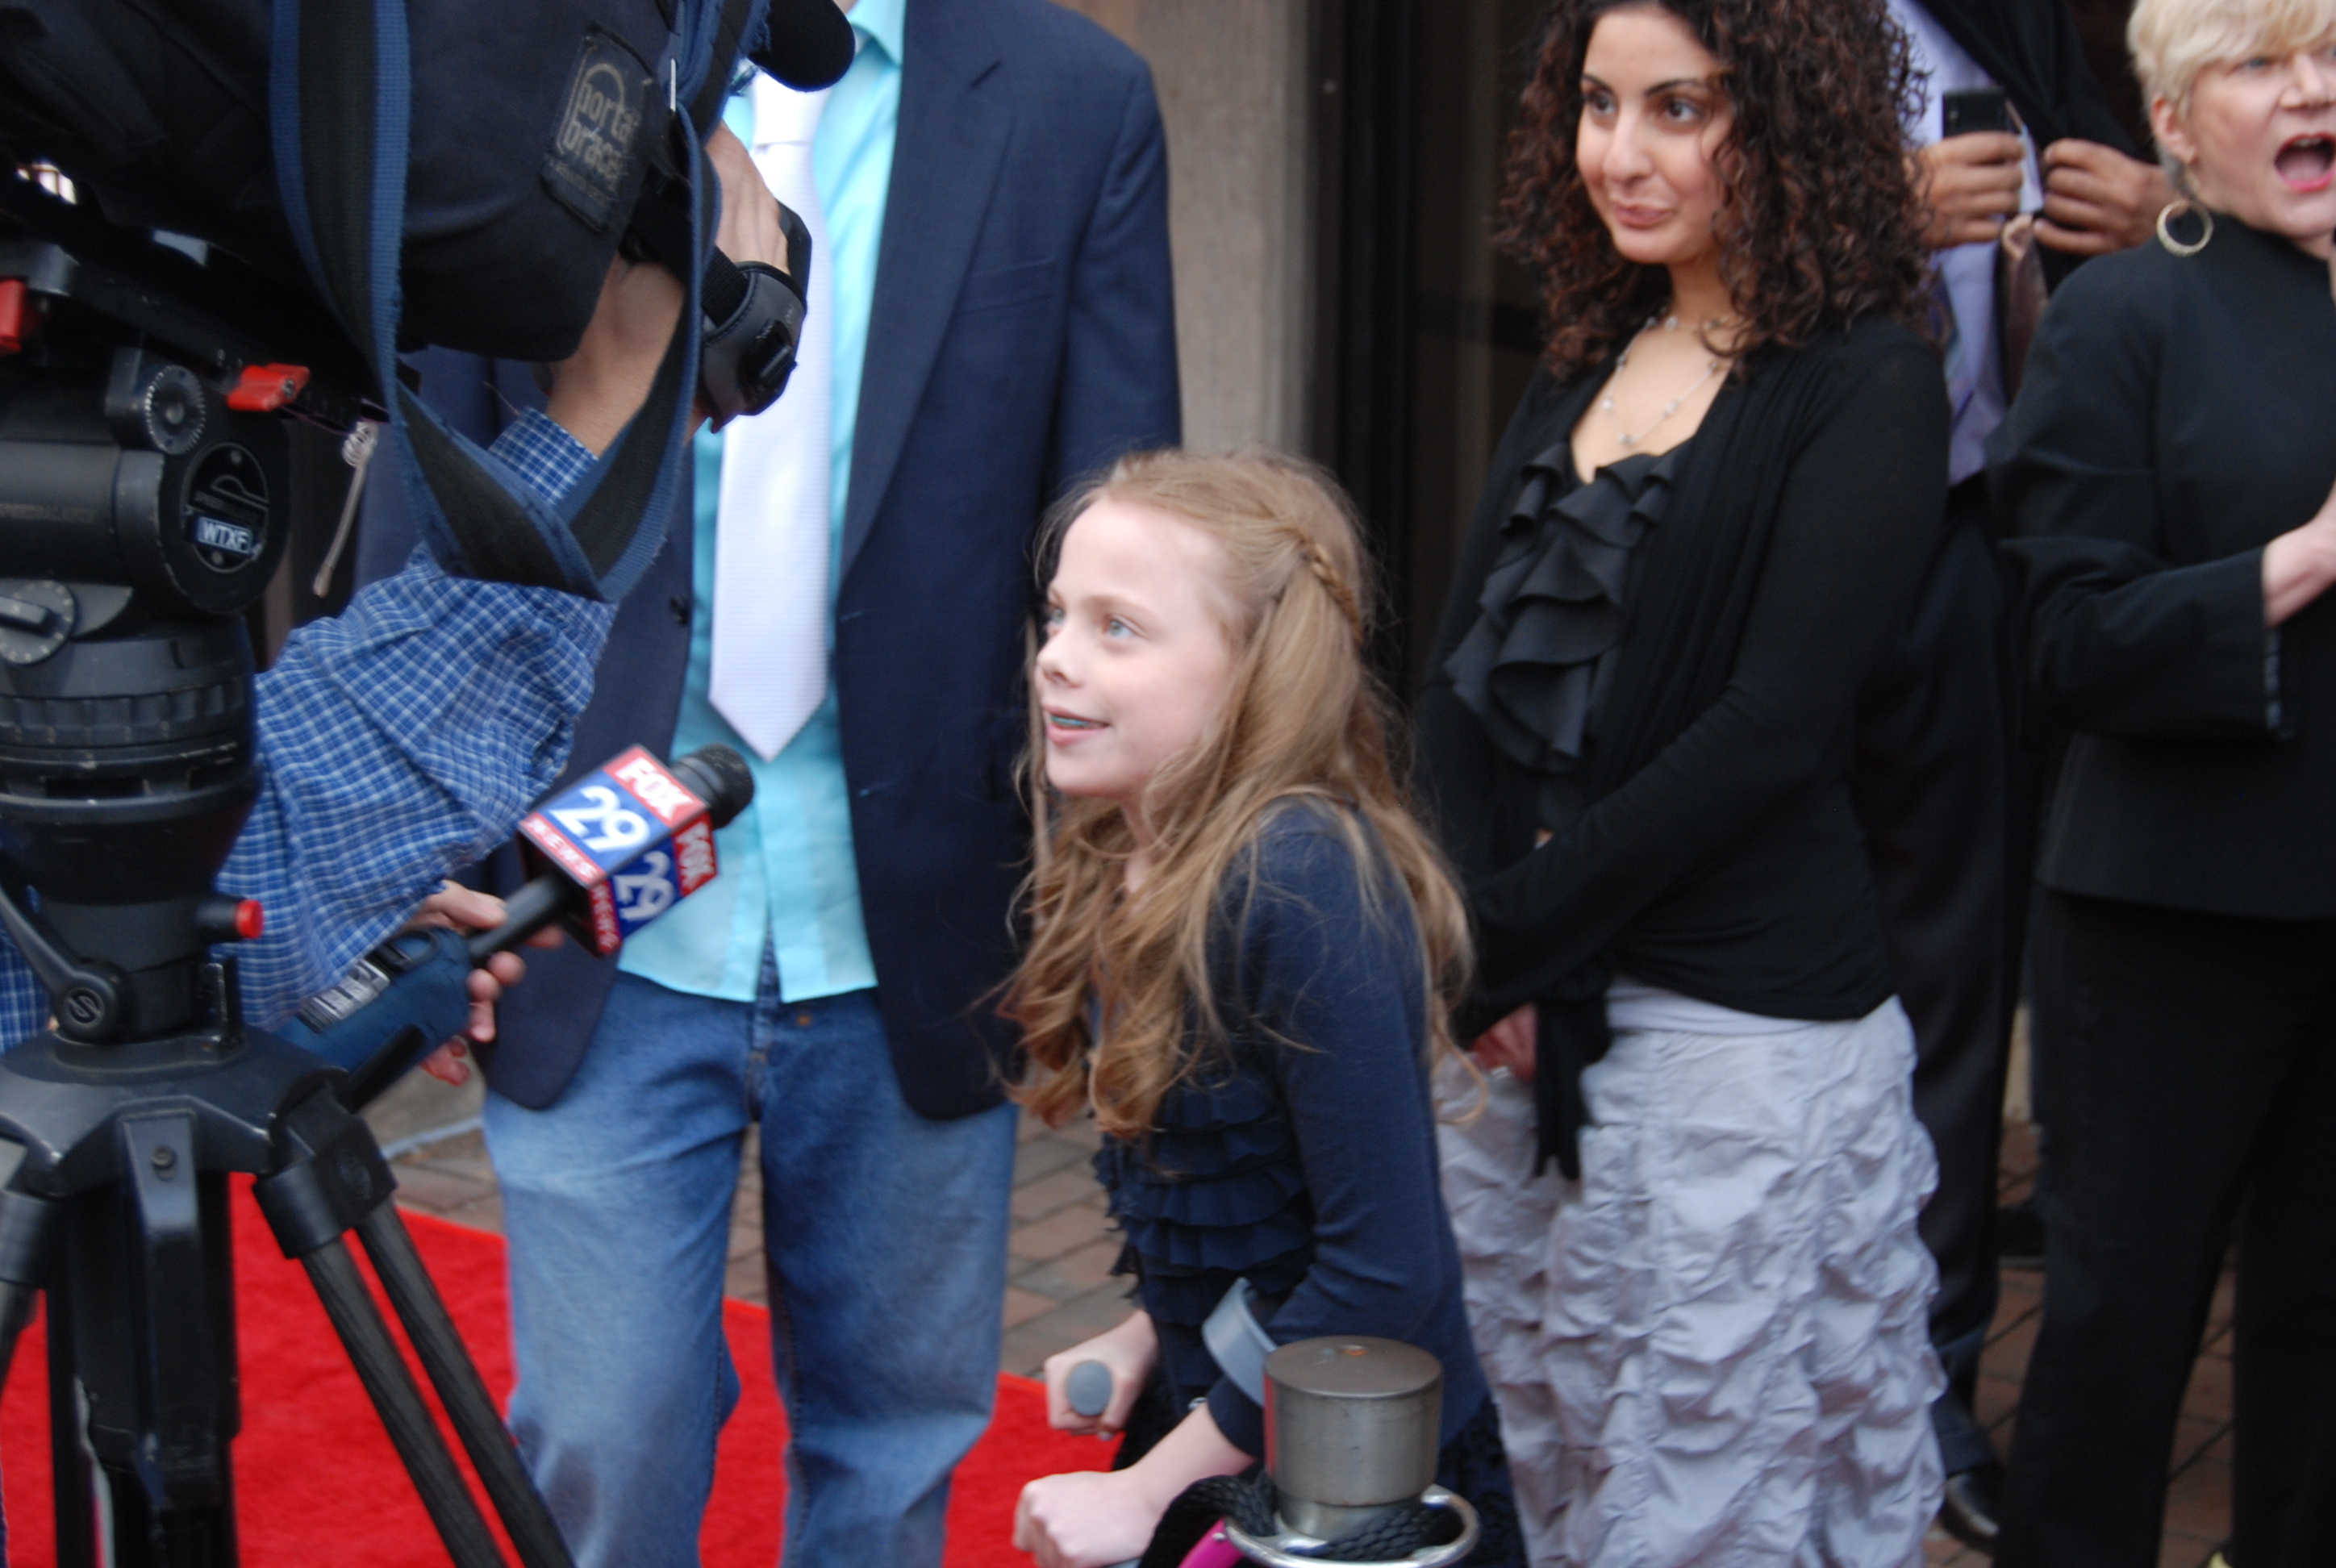 Maddie Morris Jones on Red Carpet in Philadelphia for Cost of a Soul premiere